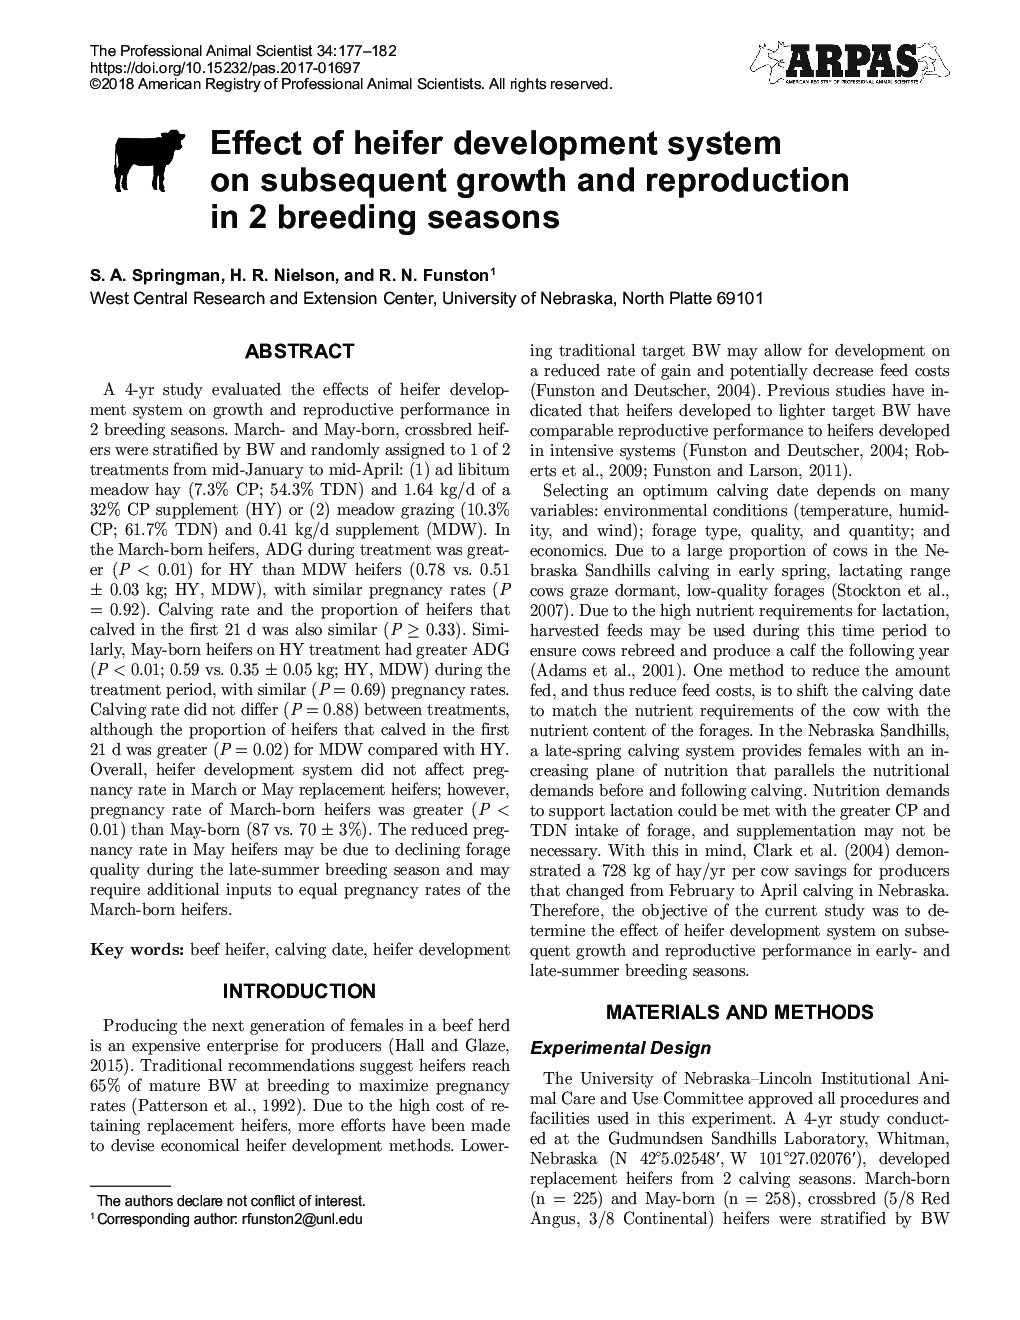 Effect of heifer development system on subsequent growth and reproduction in 2 breeding seasons